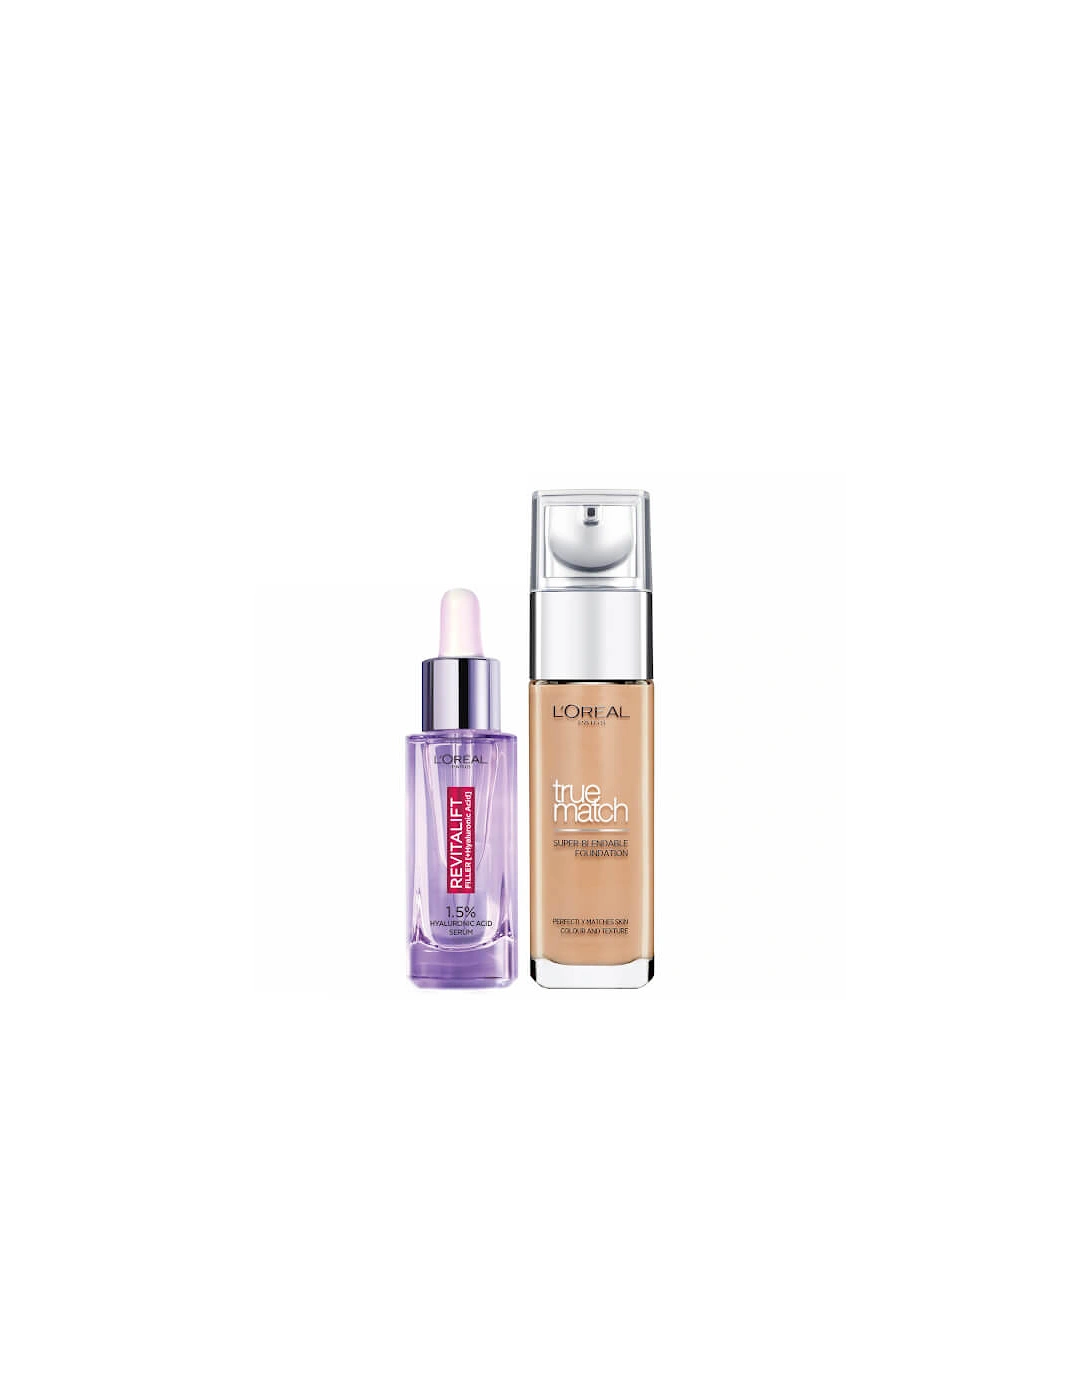 L’Oreal Paris Hyaluronic Acid Filler Serum and True Match Hyaluronic Acid Foundation Duo - 8W Golden Cappuccino, 2 of 1